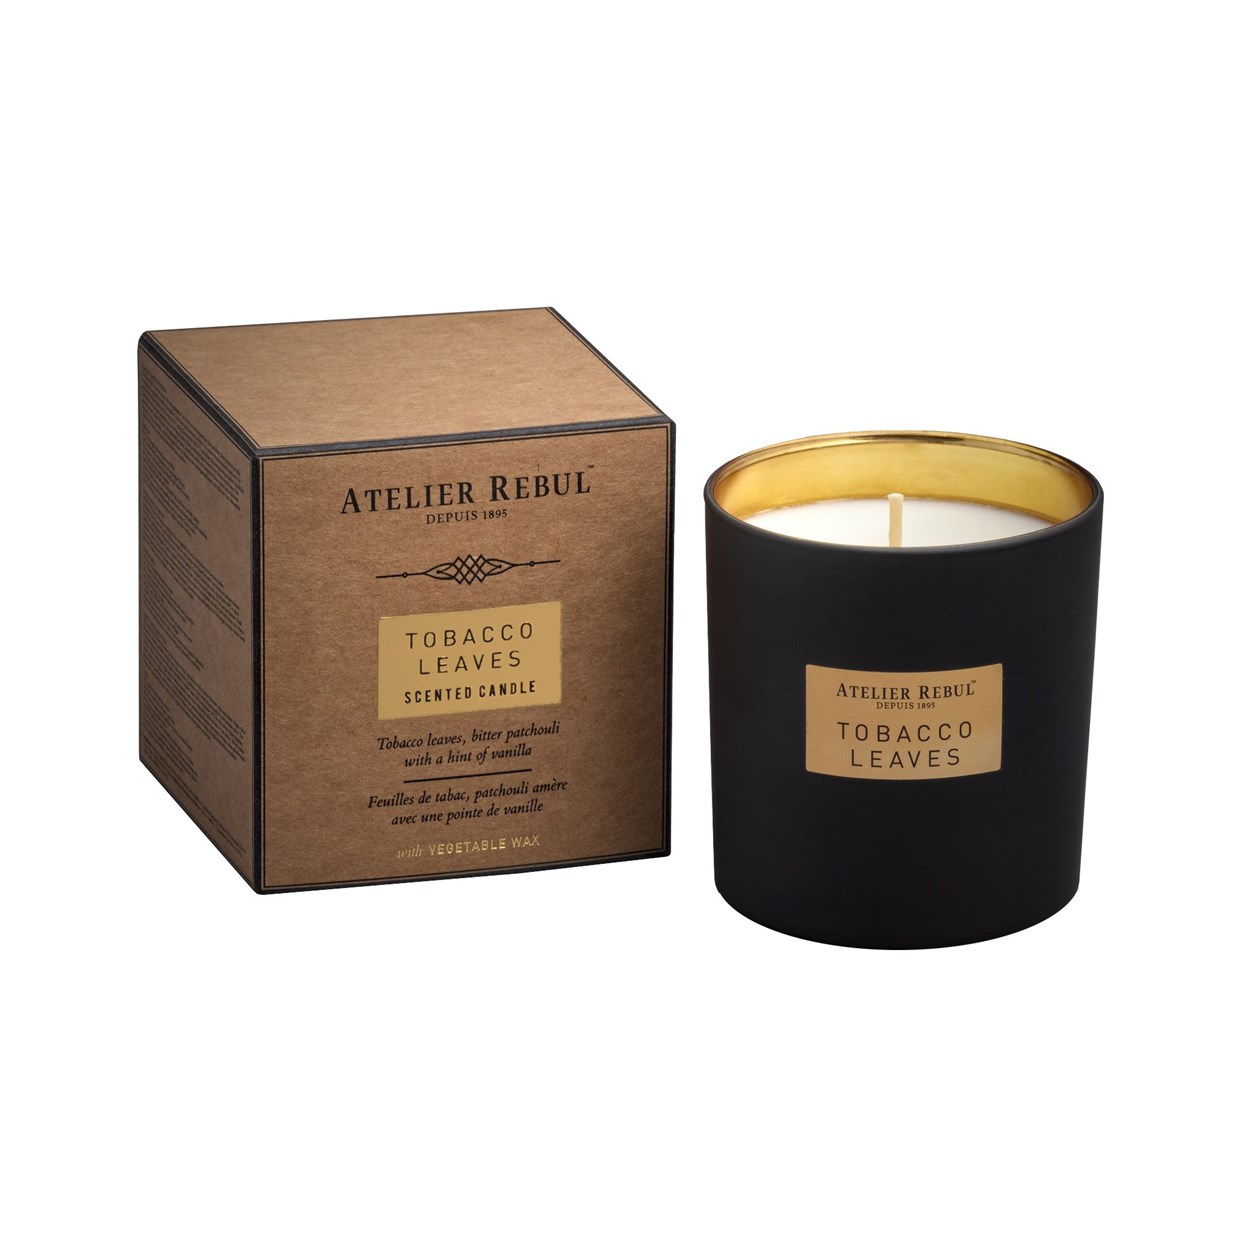 vrede Het apparaat Verleiding Atelier Rebul Fragrance Tobacco Leaves Scented Candle kopen | Beauty Plaza